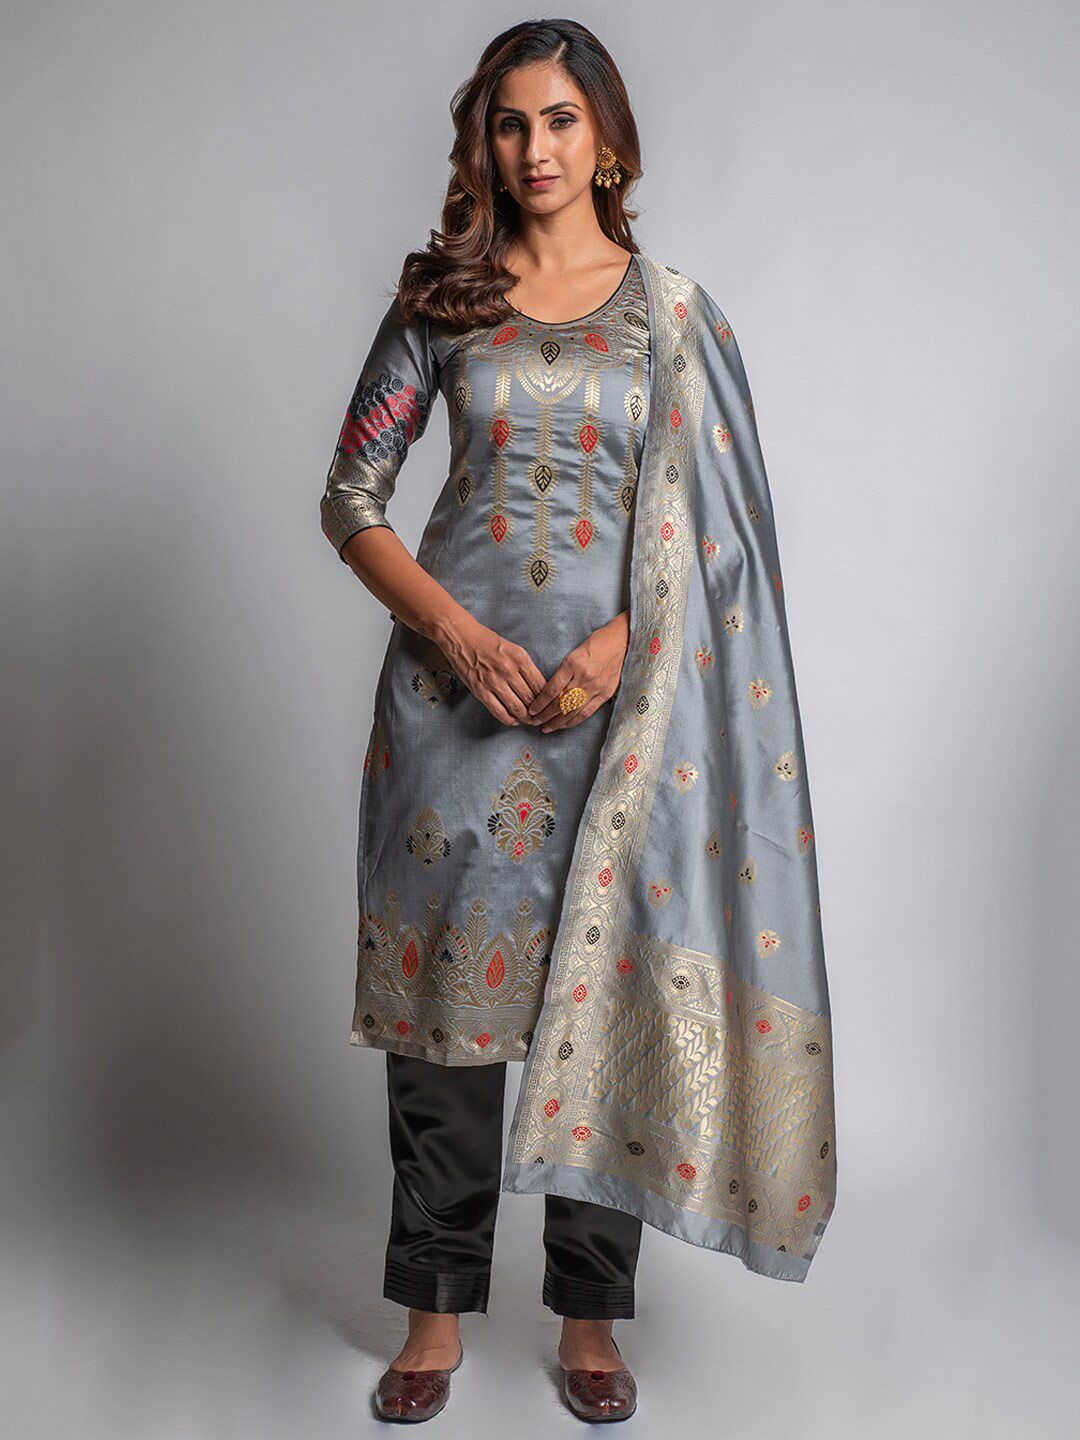 Lilots Grey & Gold-Toned Unstitched Salwar Kameez Dress Material Price in India